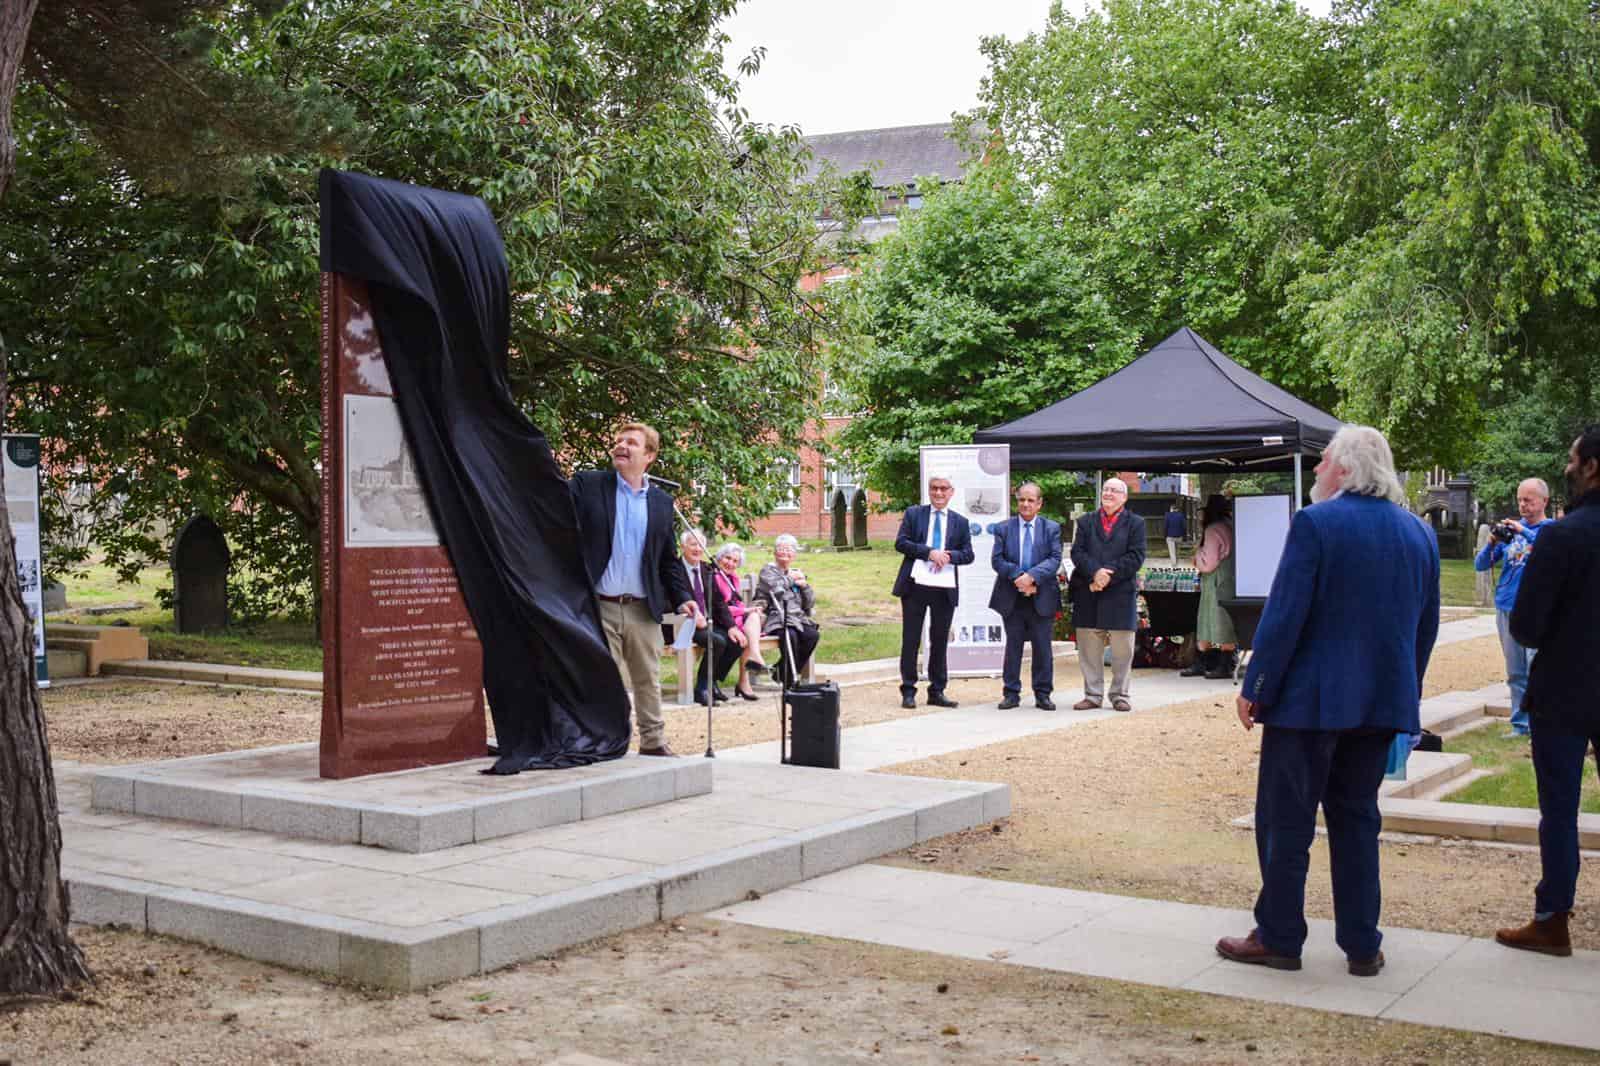 Unveiling the memorial stone in the new Garden of Memory at Warstone Lane Cemetery.